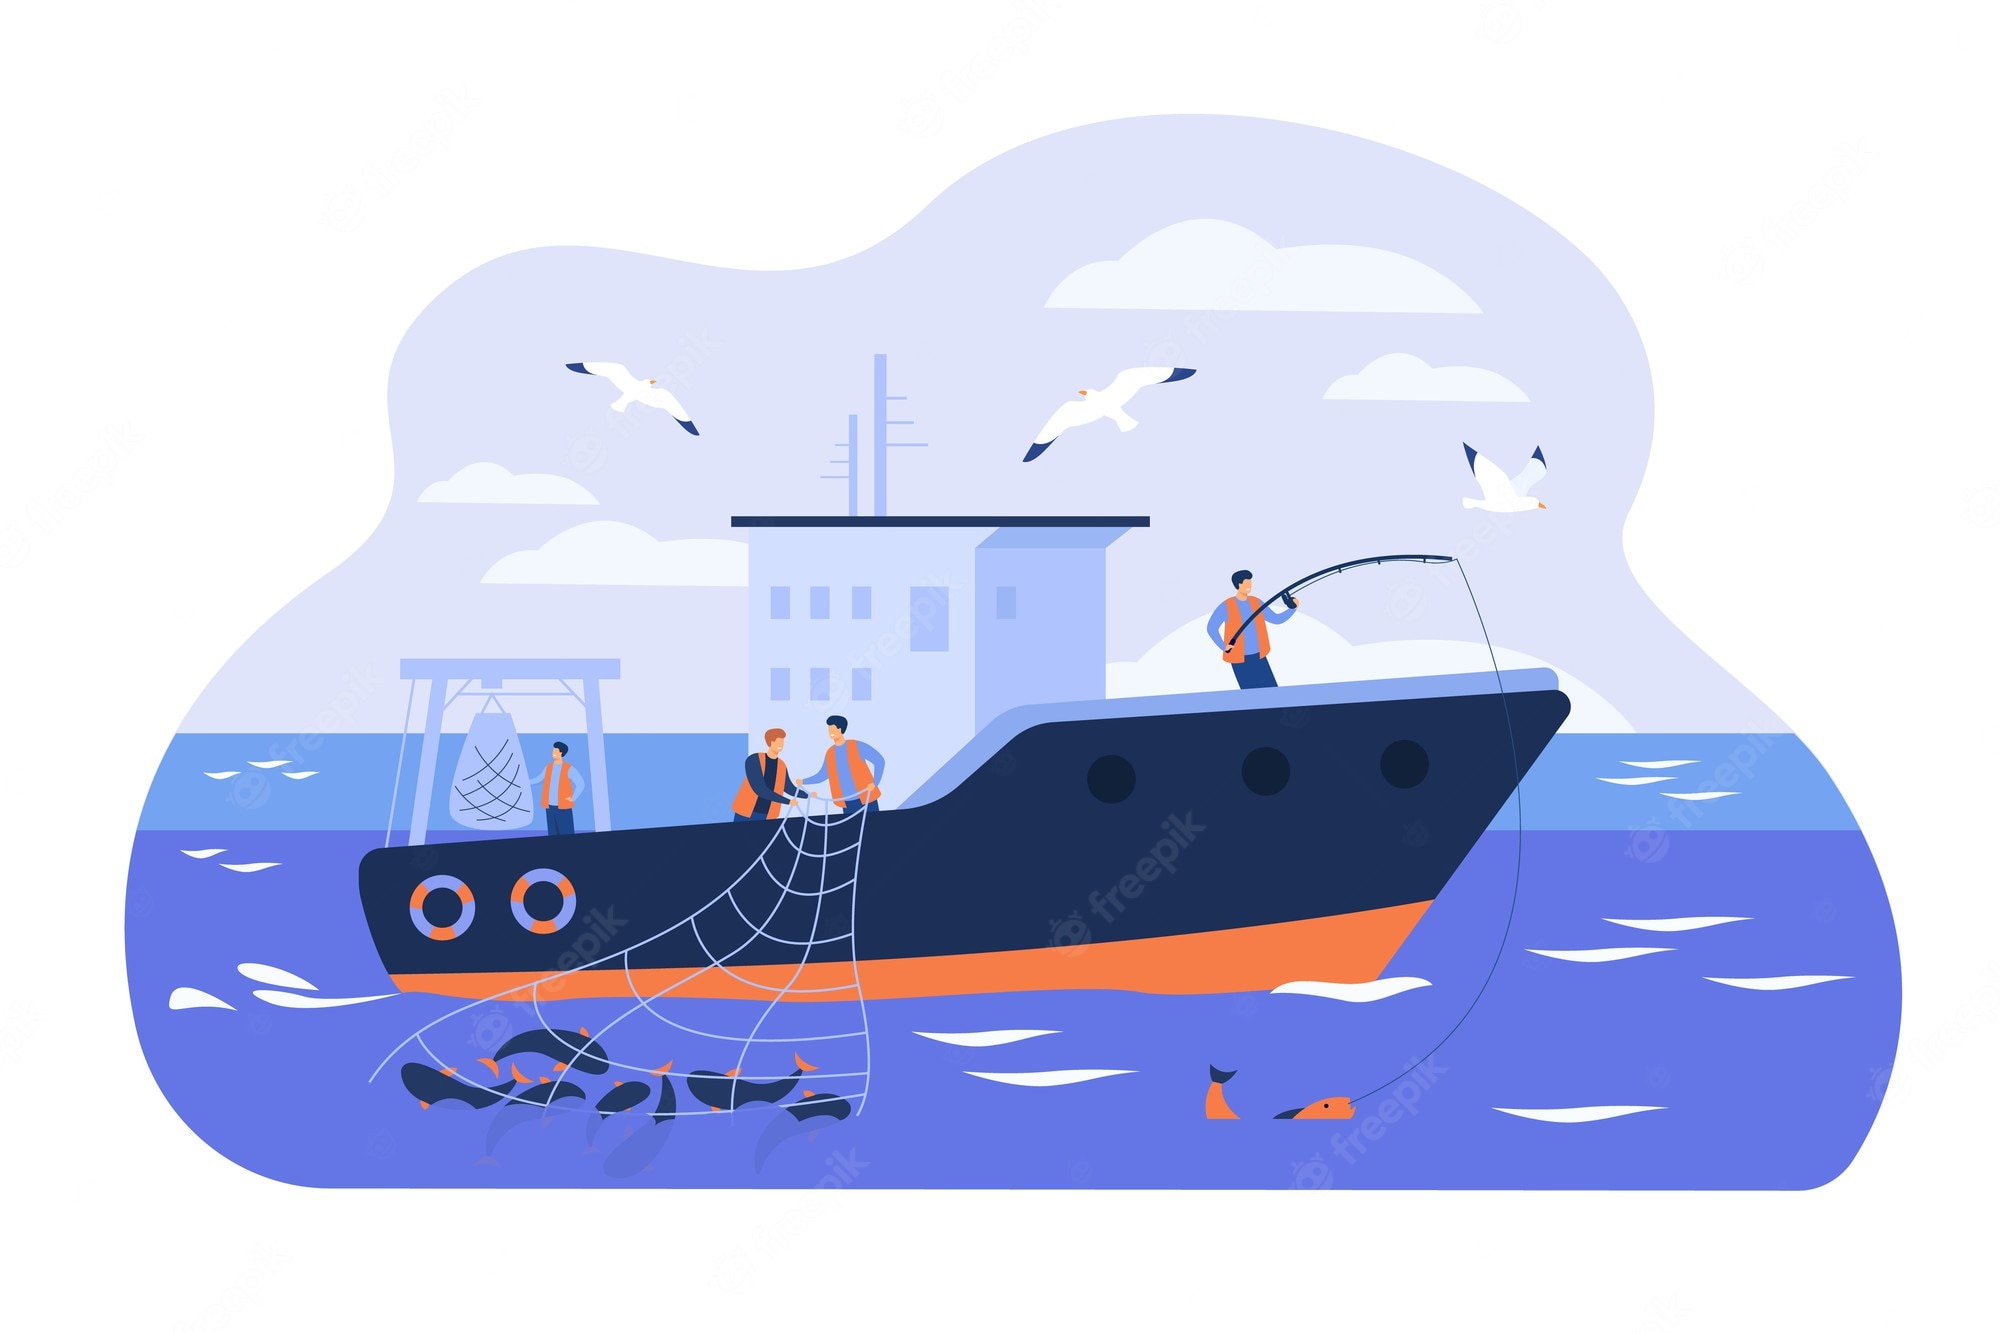 professional-fishermen-working-vessel-isolated-flat-vector-illustration- cartoon-fishers-catching-fish-using-net-ship-commercial-fishing-industry-concept_74855-13209  - Vinayak Group